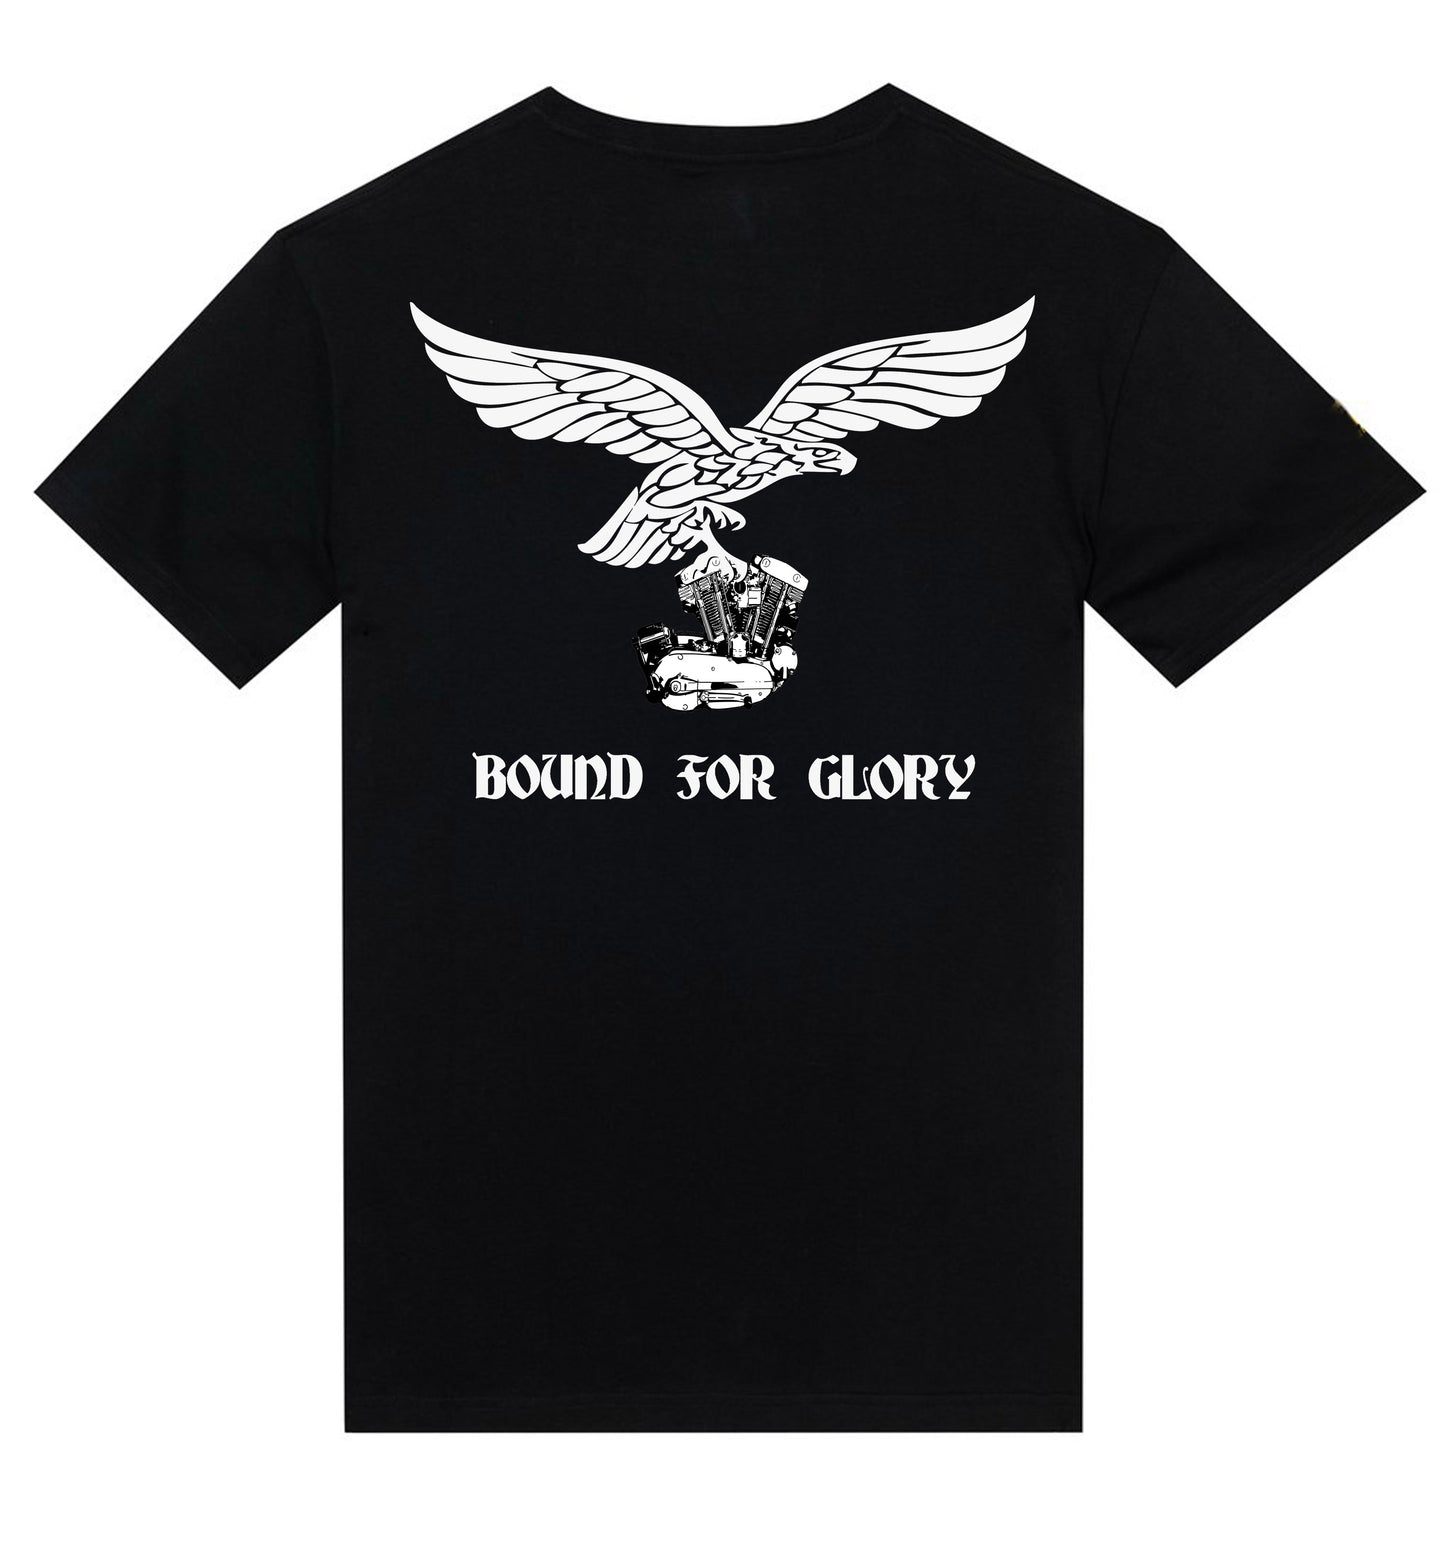 T-shirt "Bound for Glory"